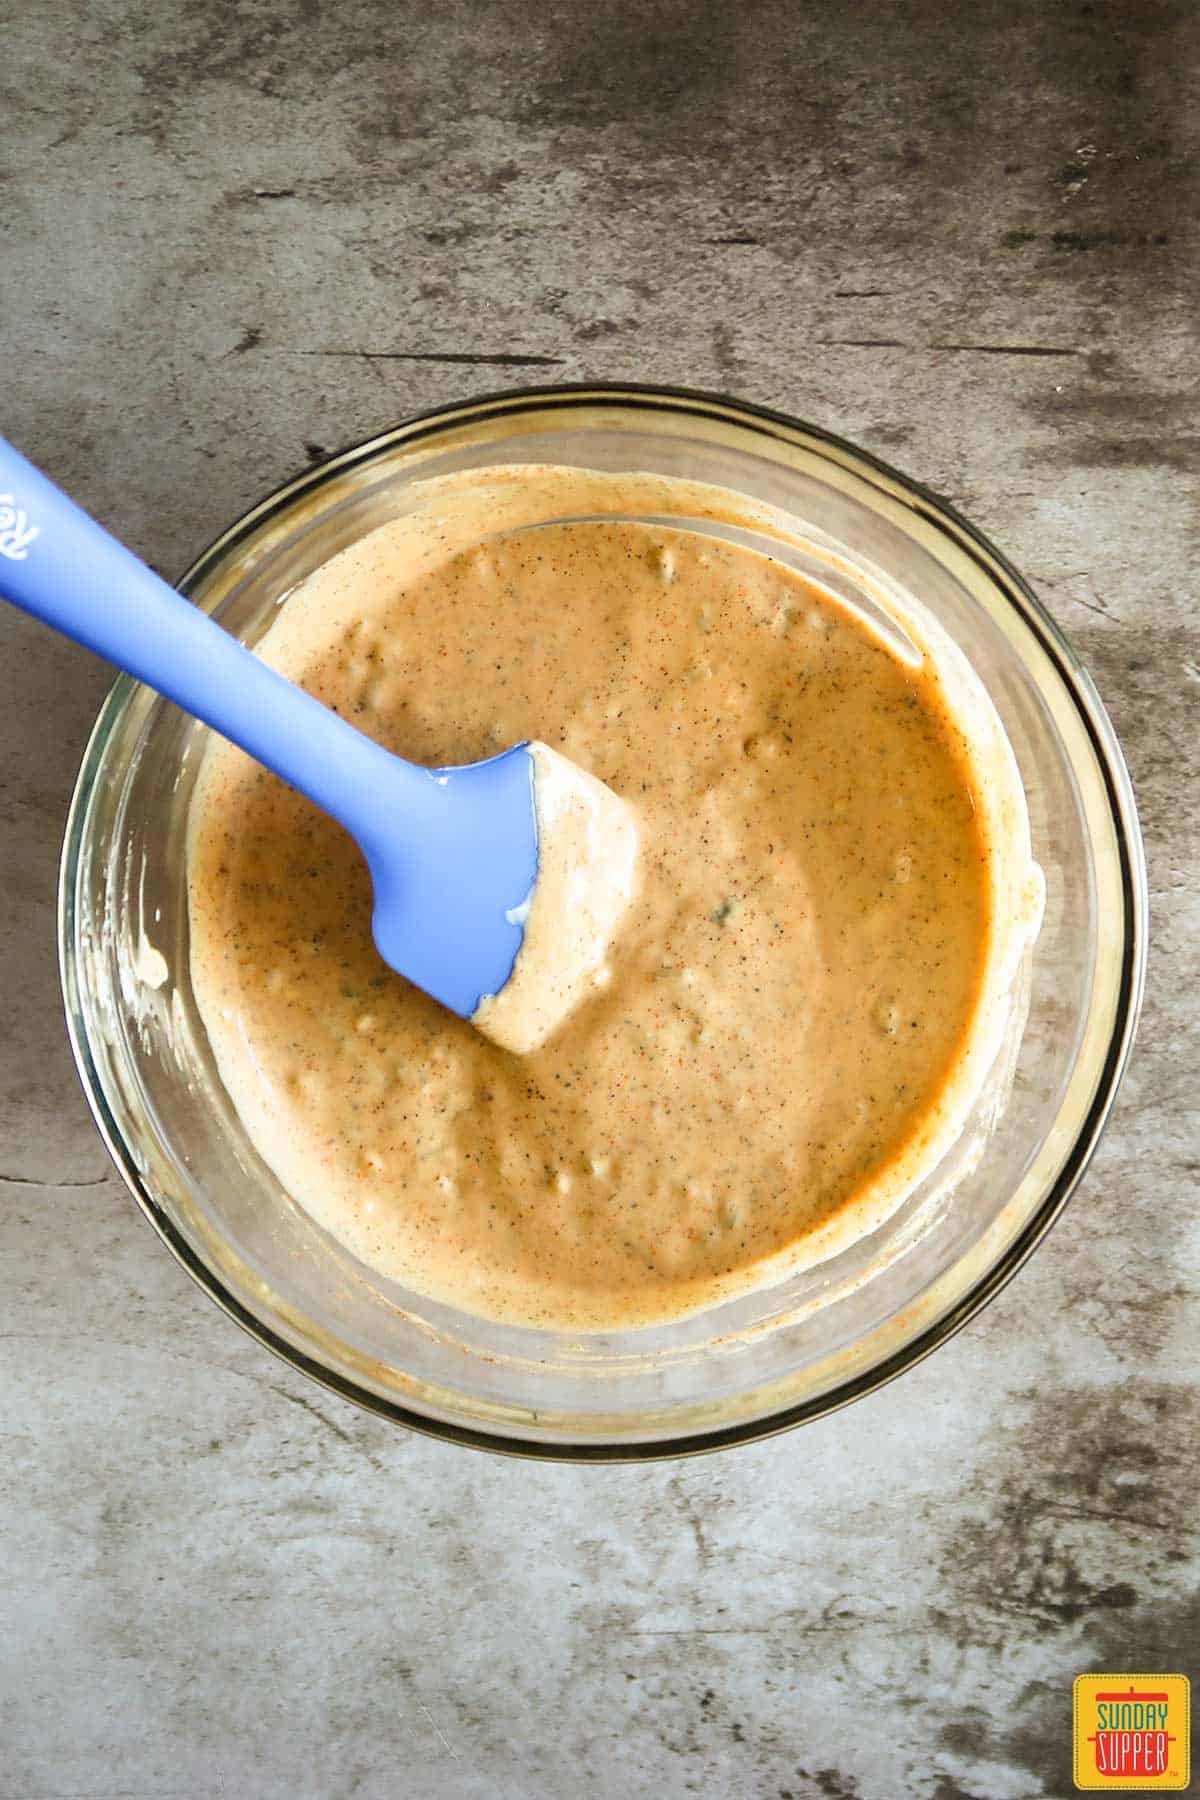 Stirring remoulade sauce in a glass bowl with a blue spatula